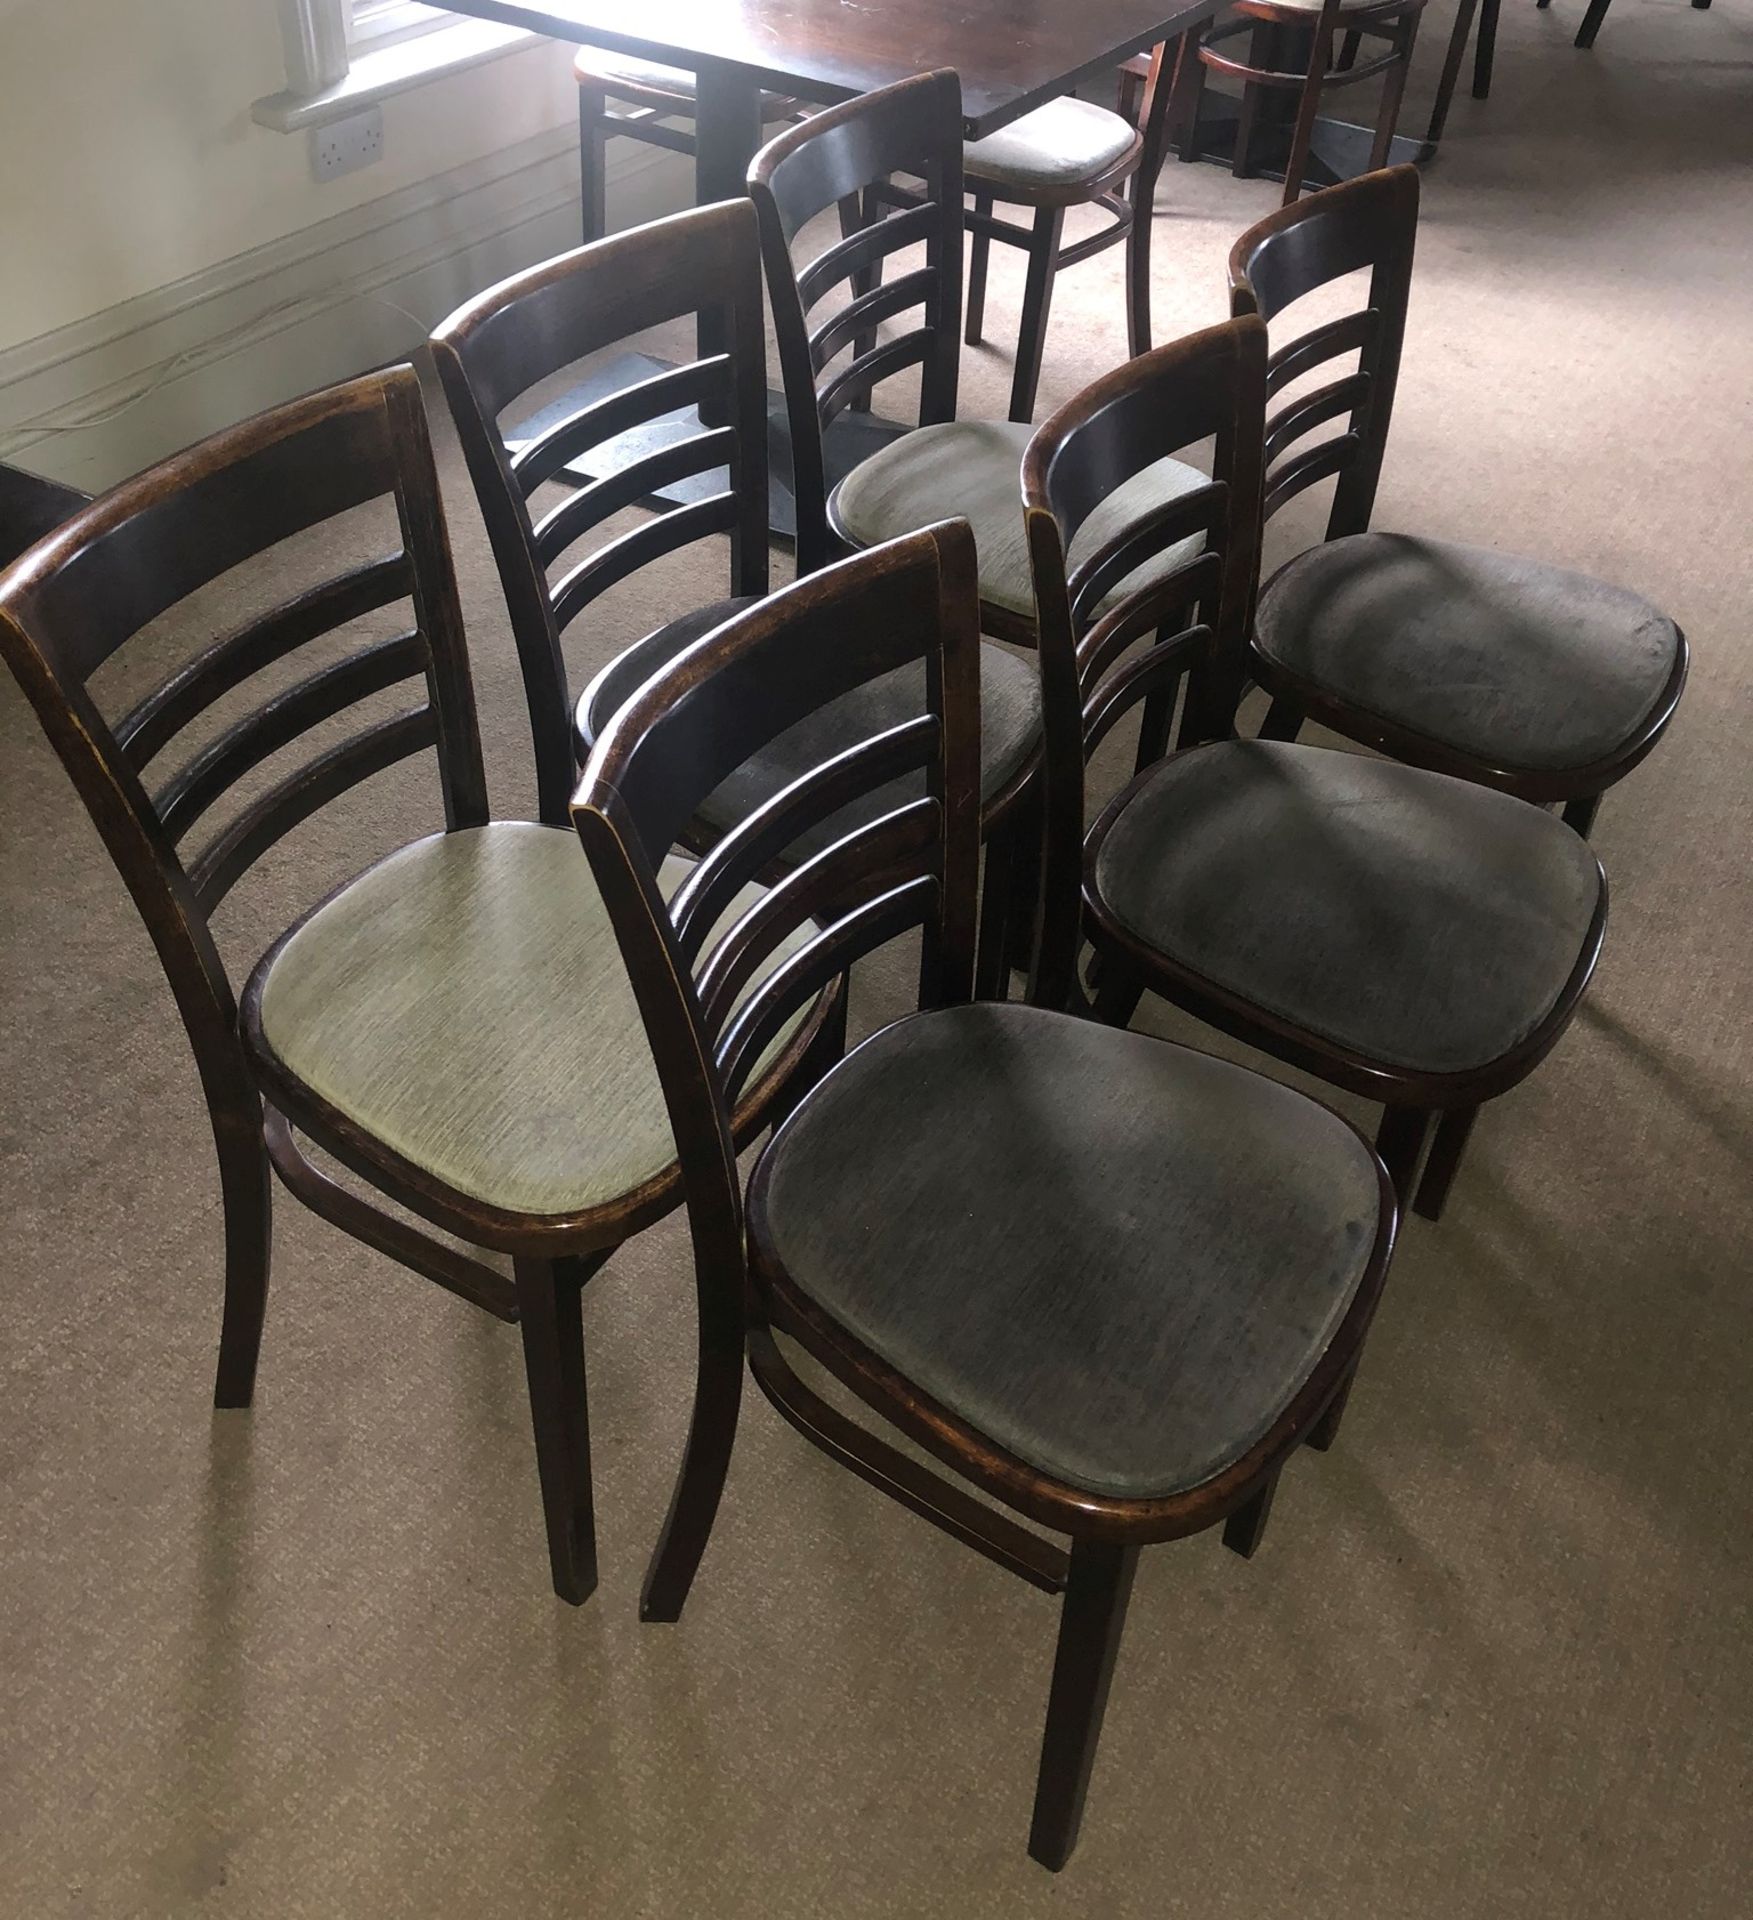 6 x Wooden Dining Chairs w/ Cushioned Seating - Image 2 of 3